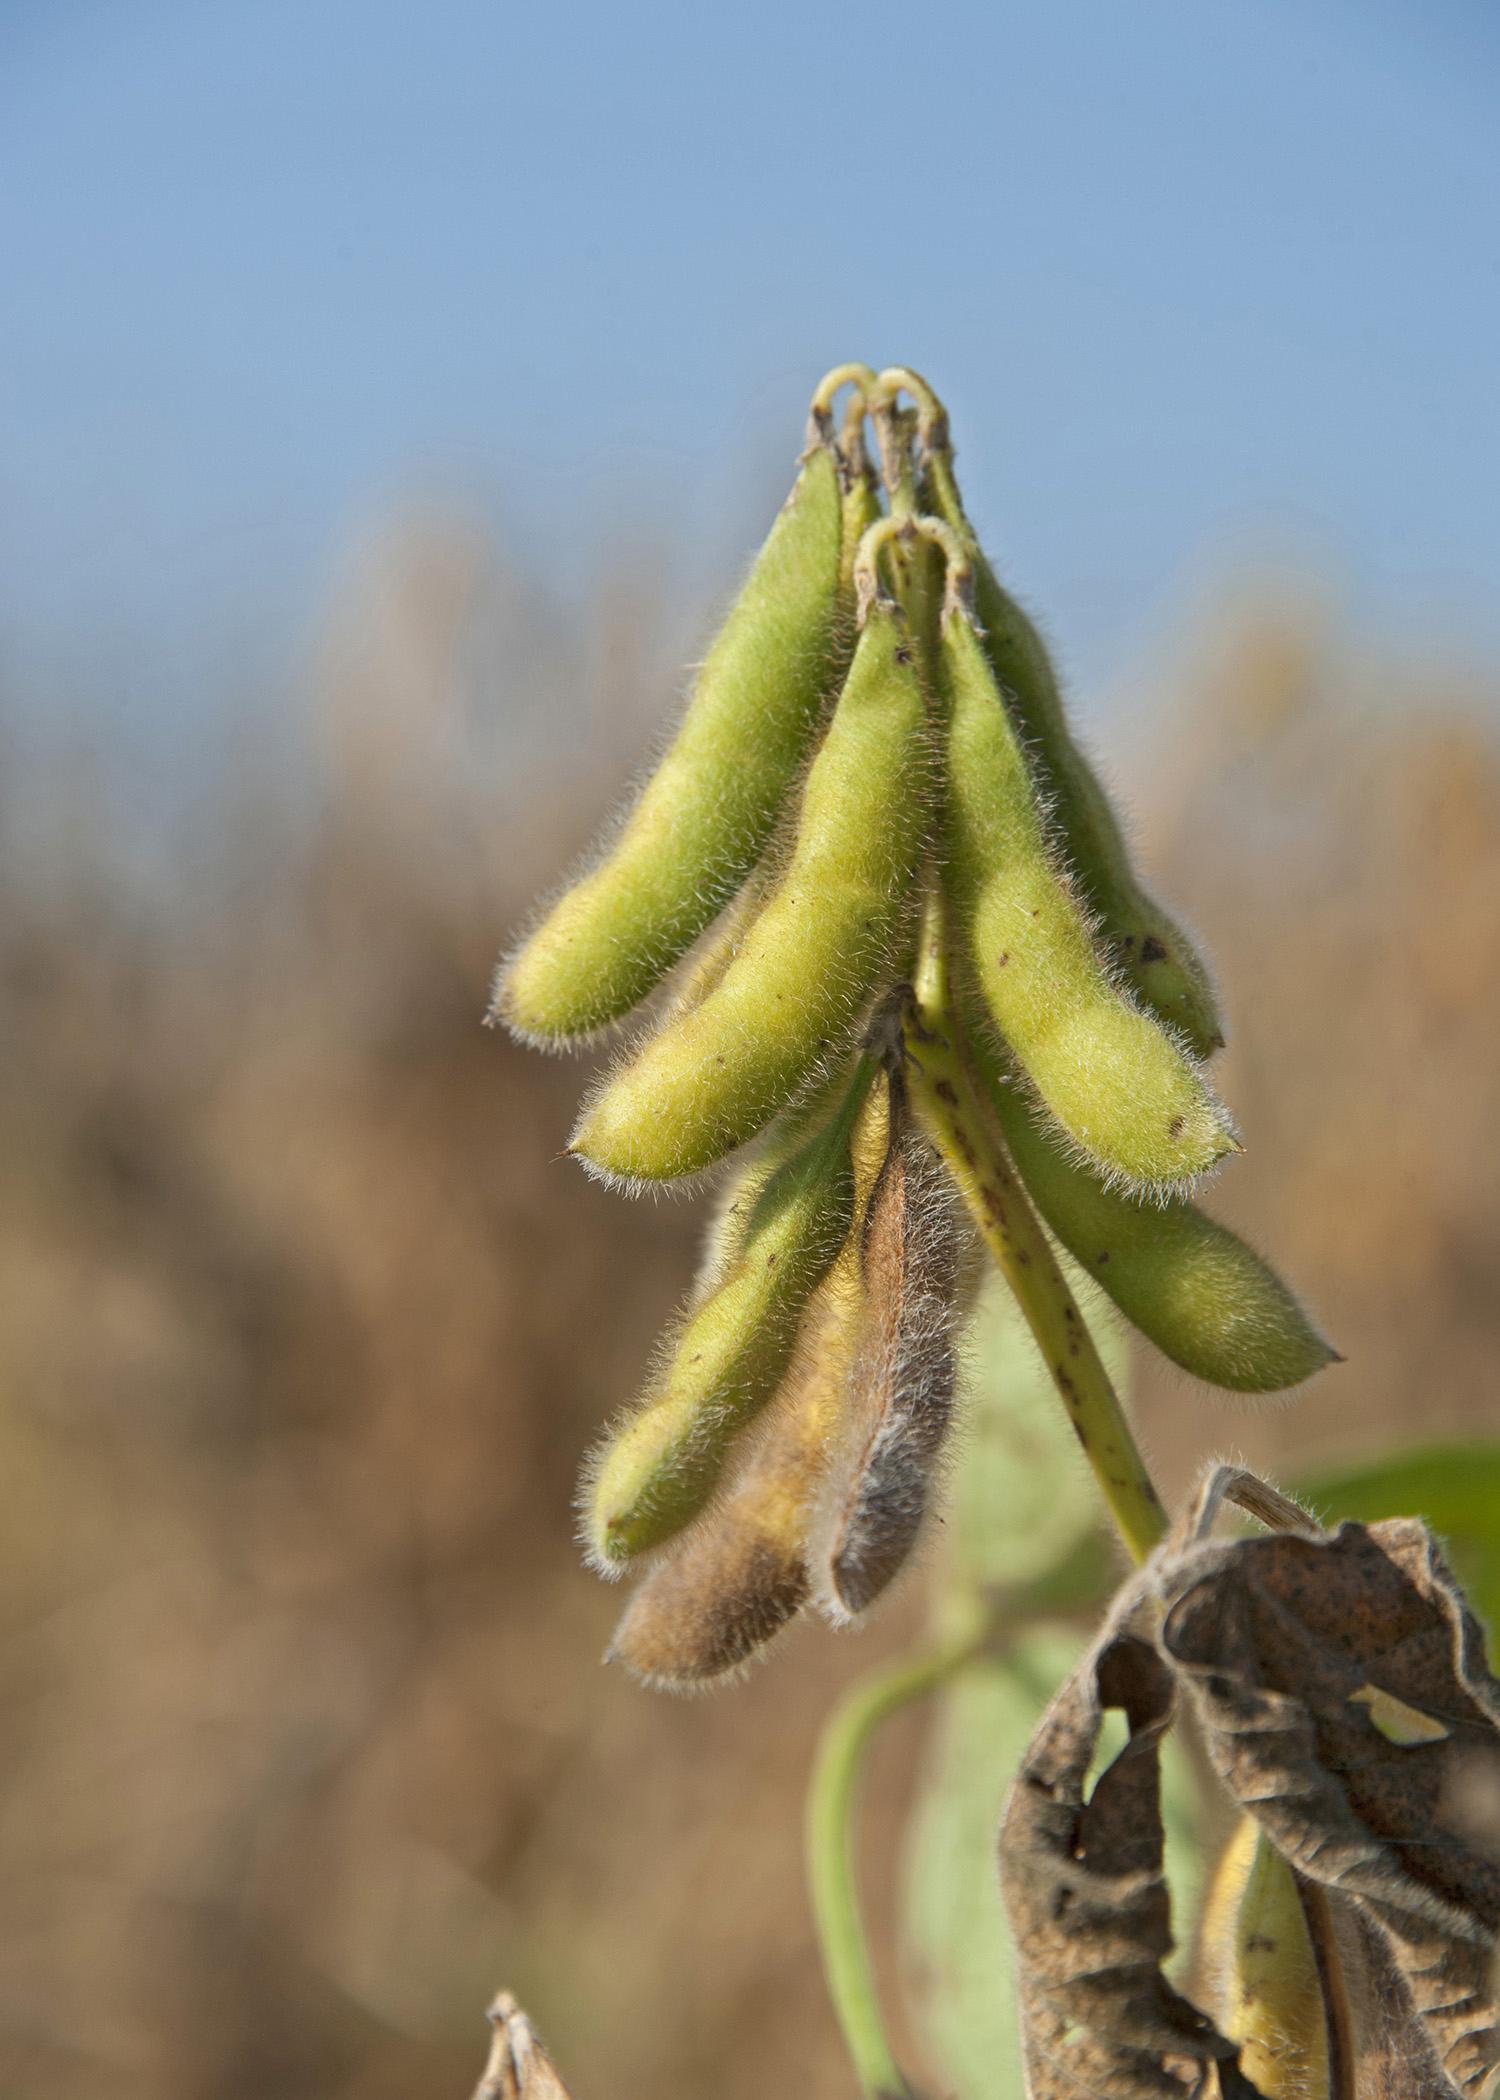 Although the value was down in 2013, Mississippi soybeans netted an estimated $993 million for state producers and remained the state's biggest row crop. (Photo by MSU Ag Communications/Kat Lawrence)